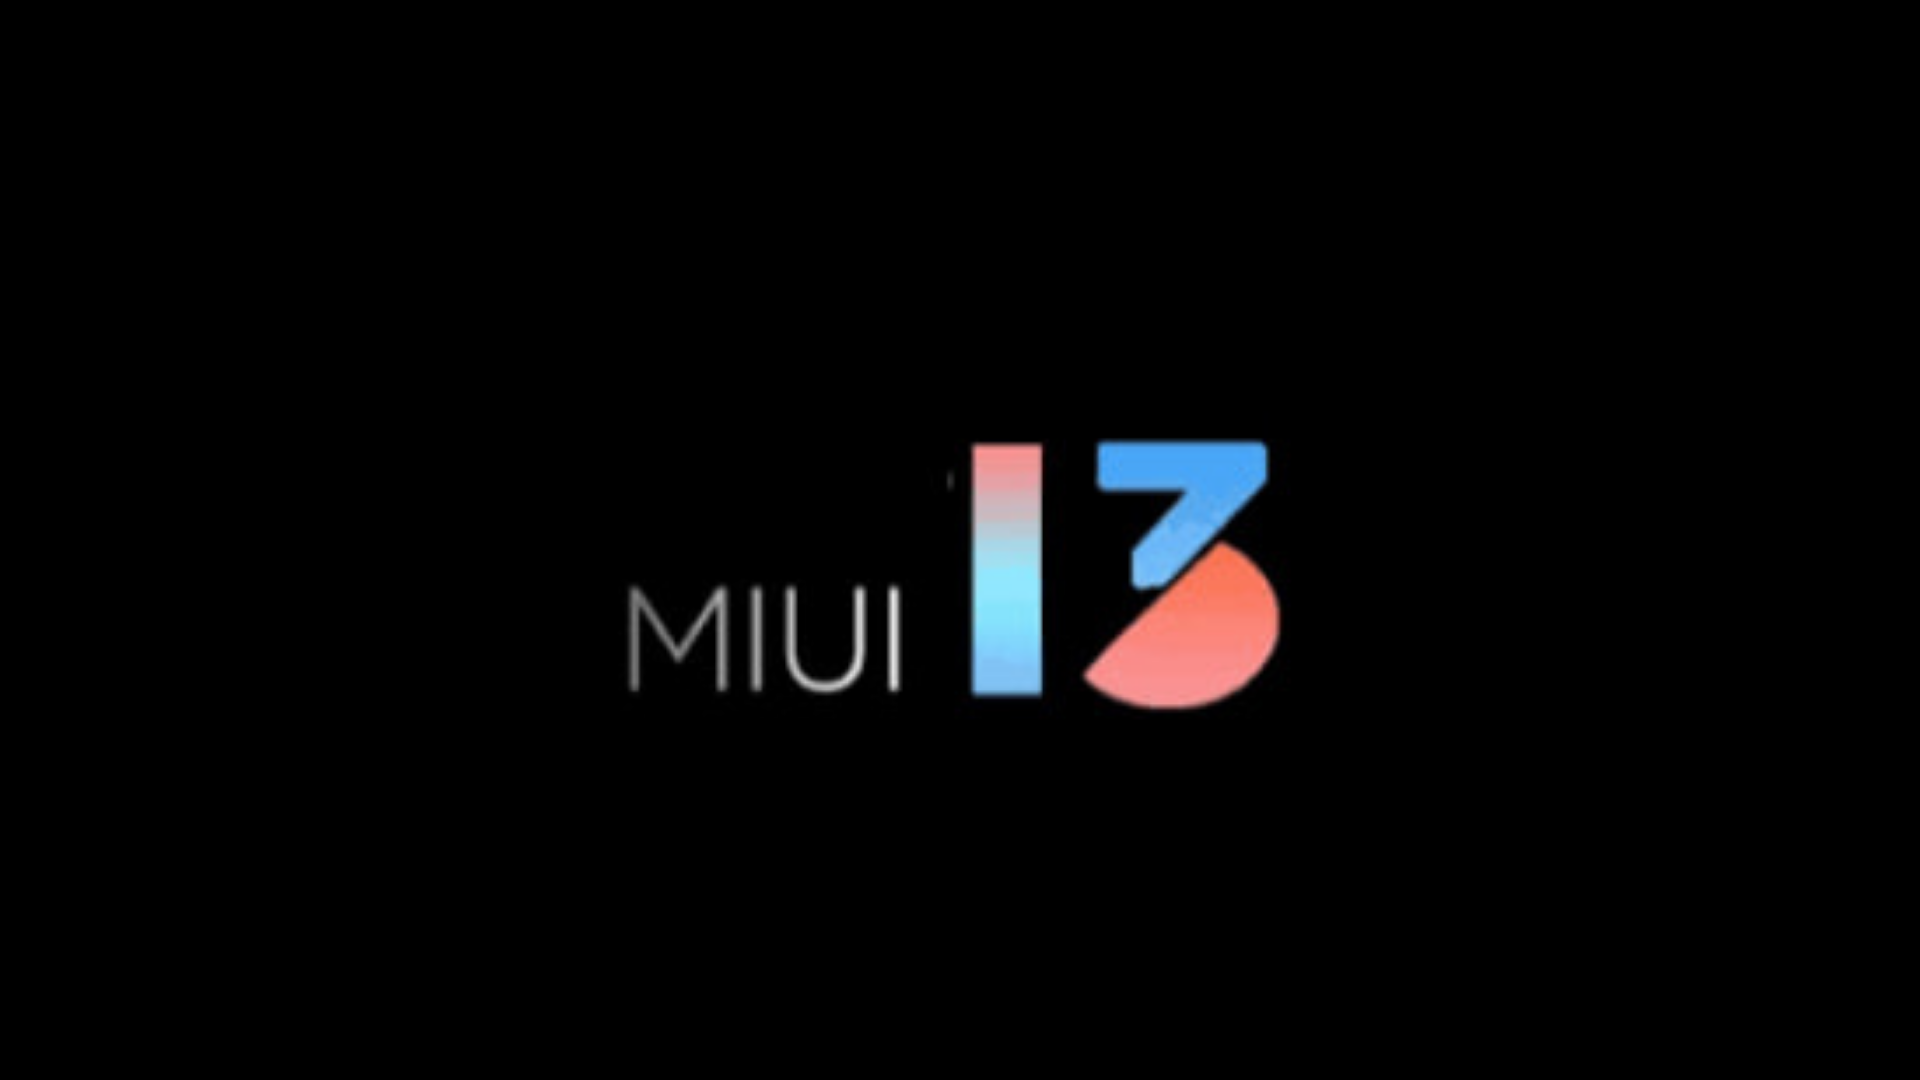 MIUI 13 To Feature Ram Expansion using Virtual Memory